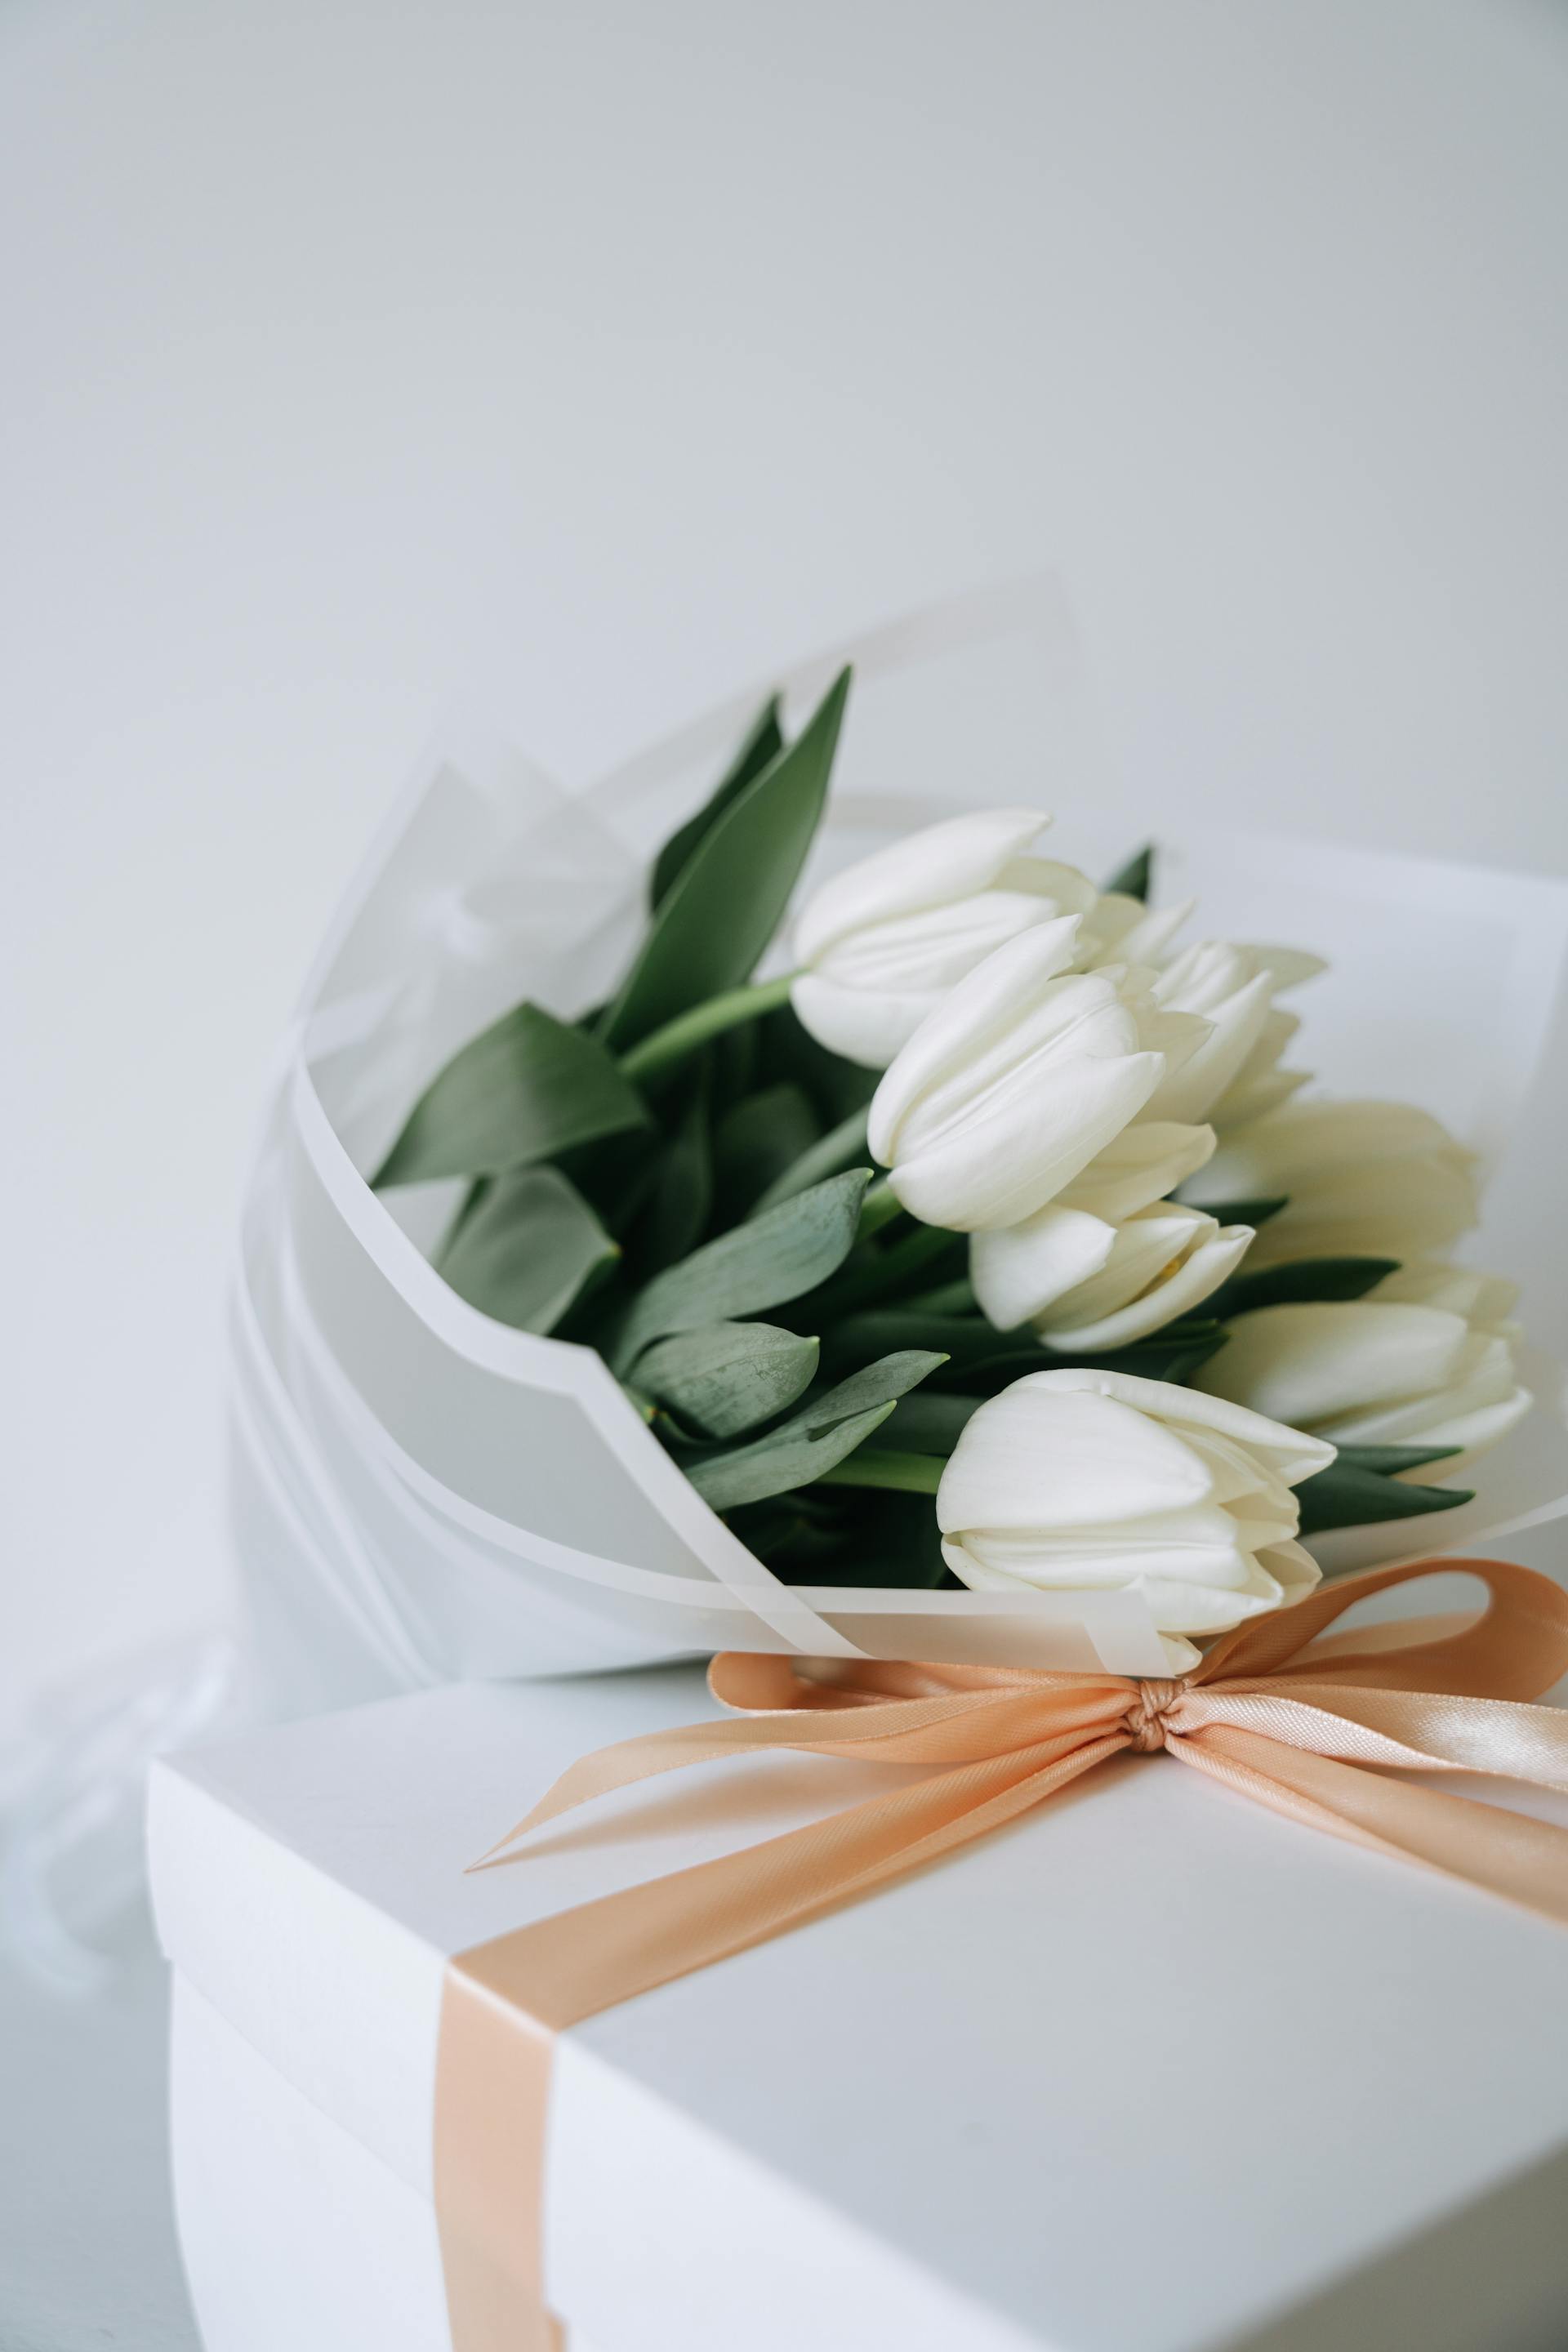 A bouquet of white tulips and a giftbox | Source: Pexels